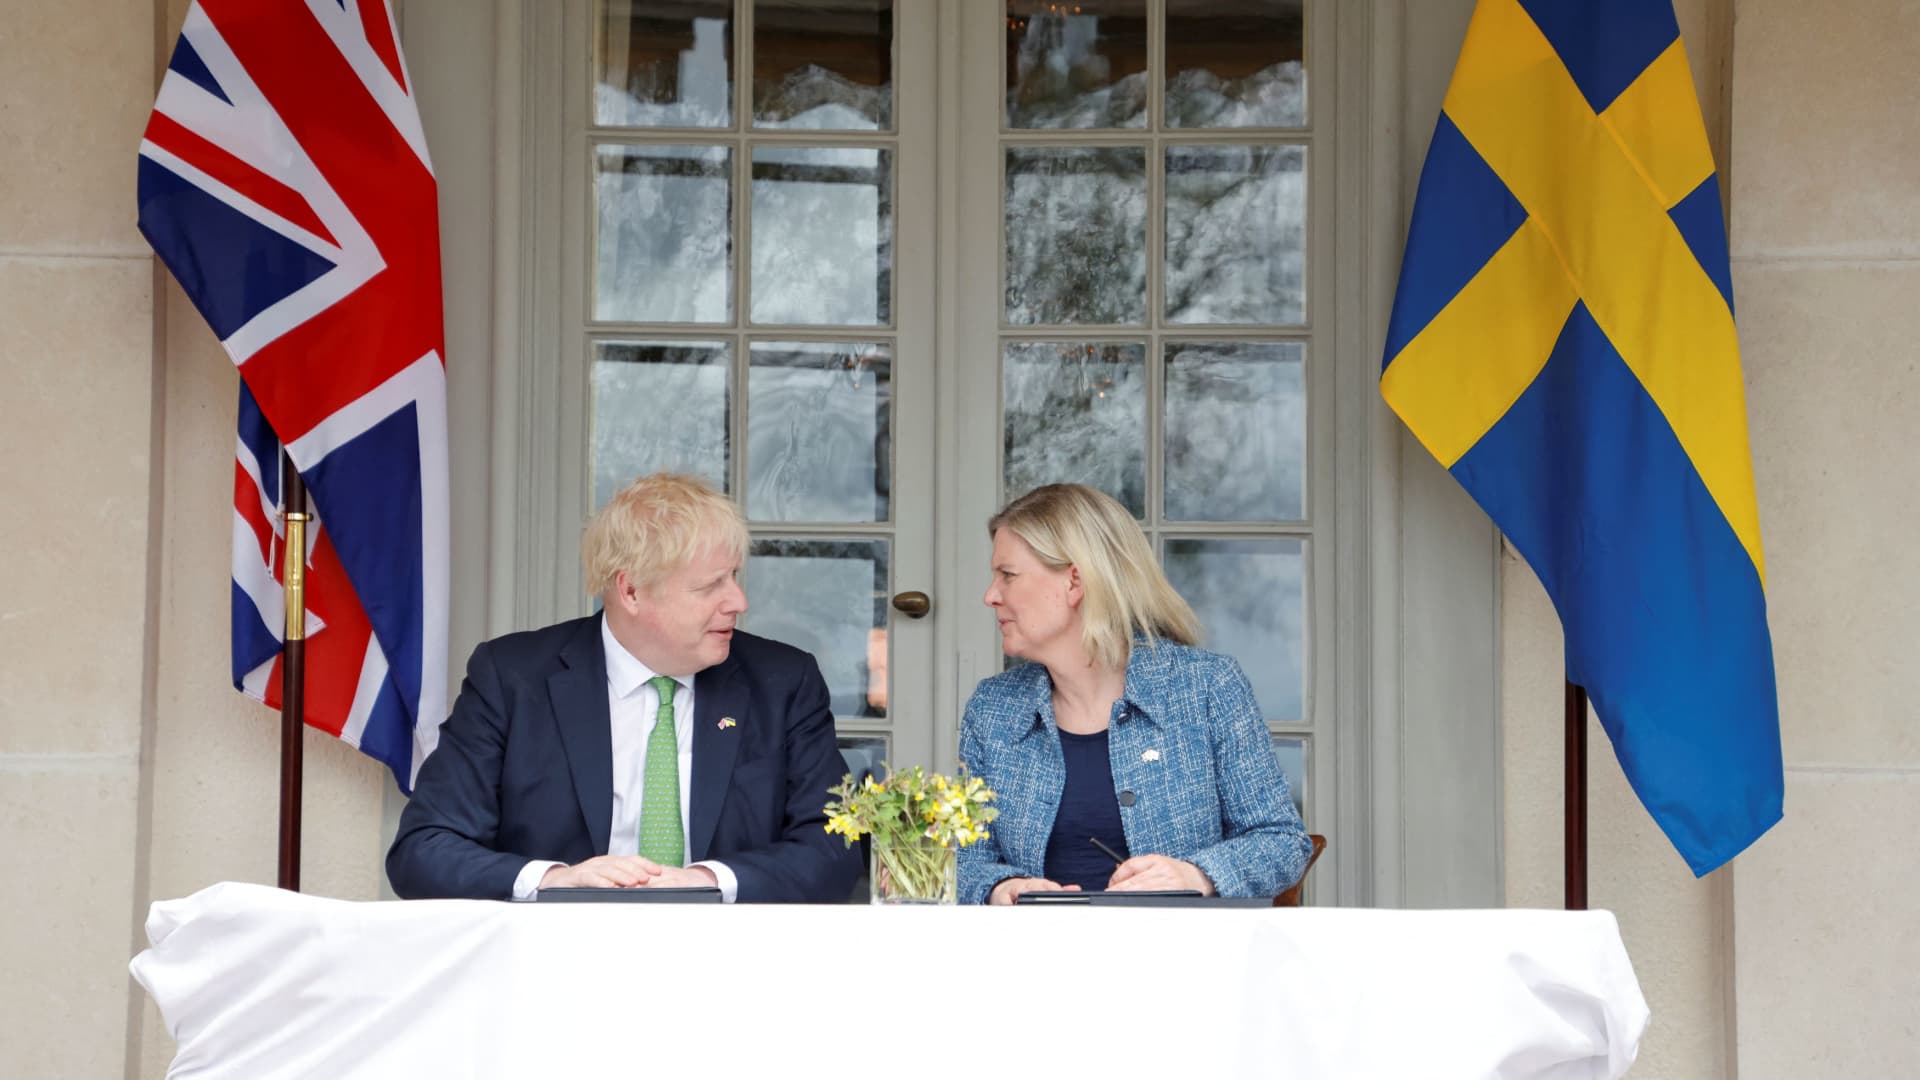 British Prime Minister Boris Johnson and Sweden's Prime Minister Magdalena Andersson sign documents as they meet at the Swedish Prime Minister's summer residence in Harpsund, Sweden May 11, 2022. 